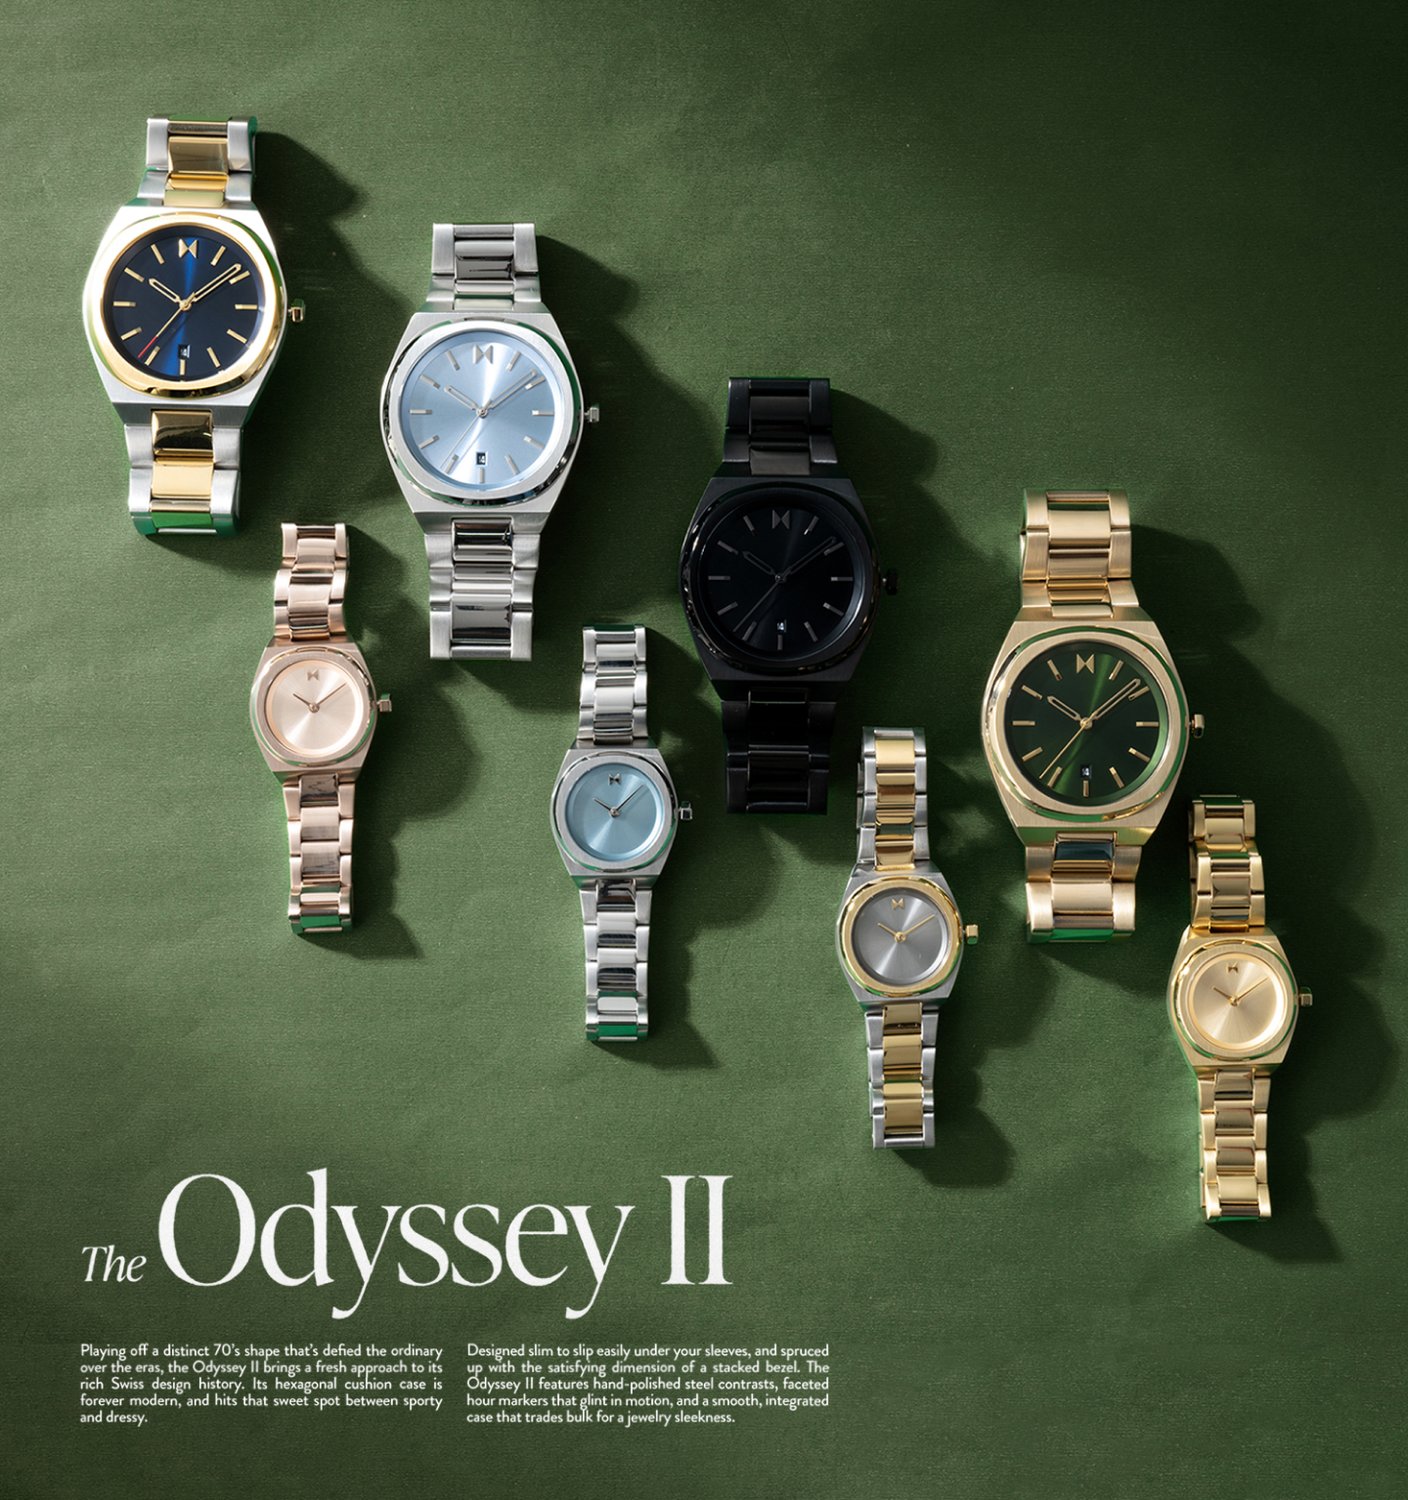 MVMT Odyssey II watch in gold with green face